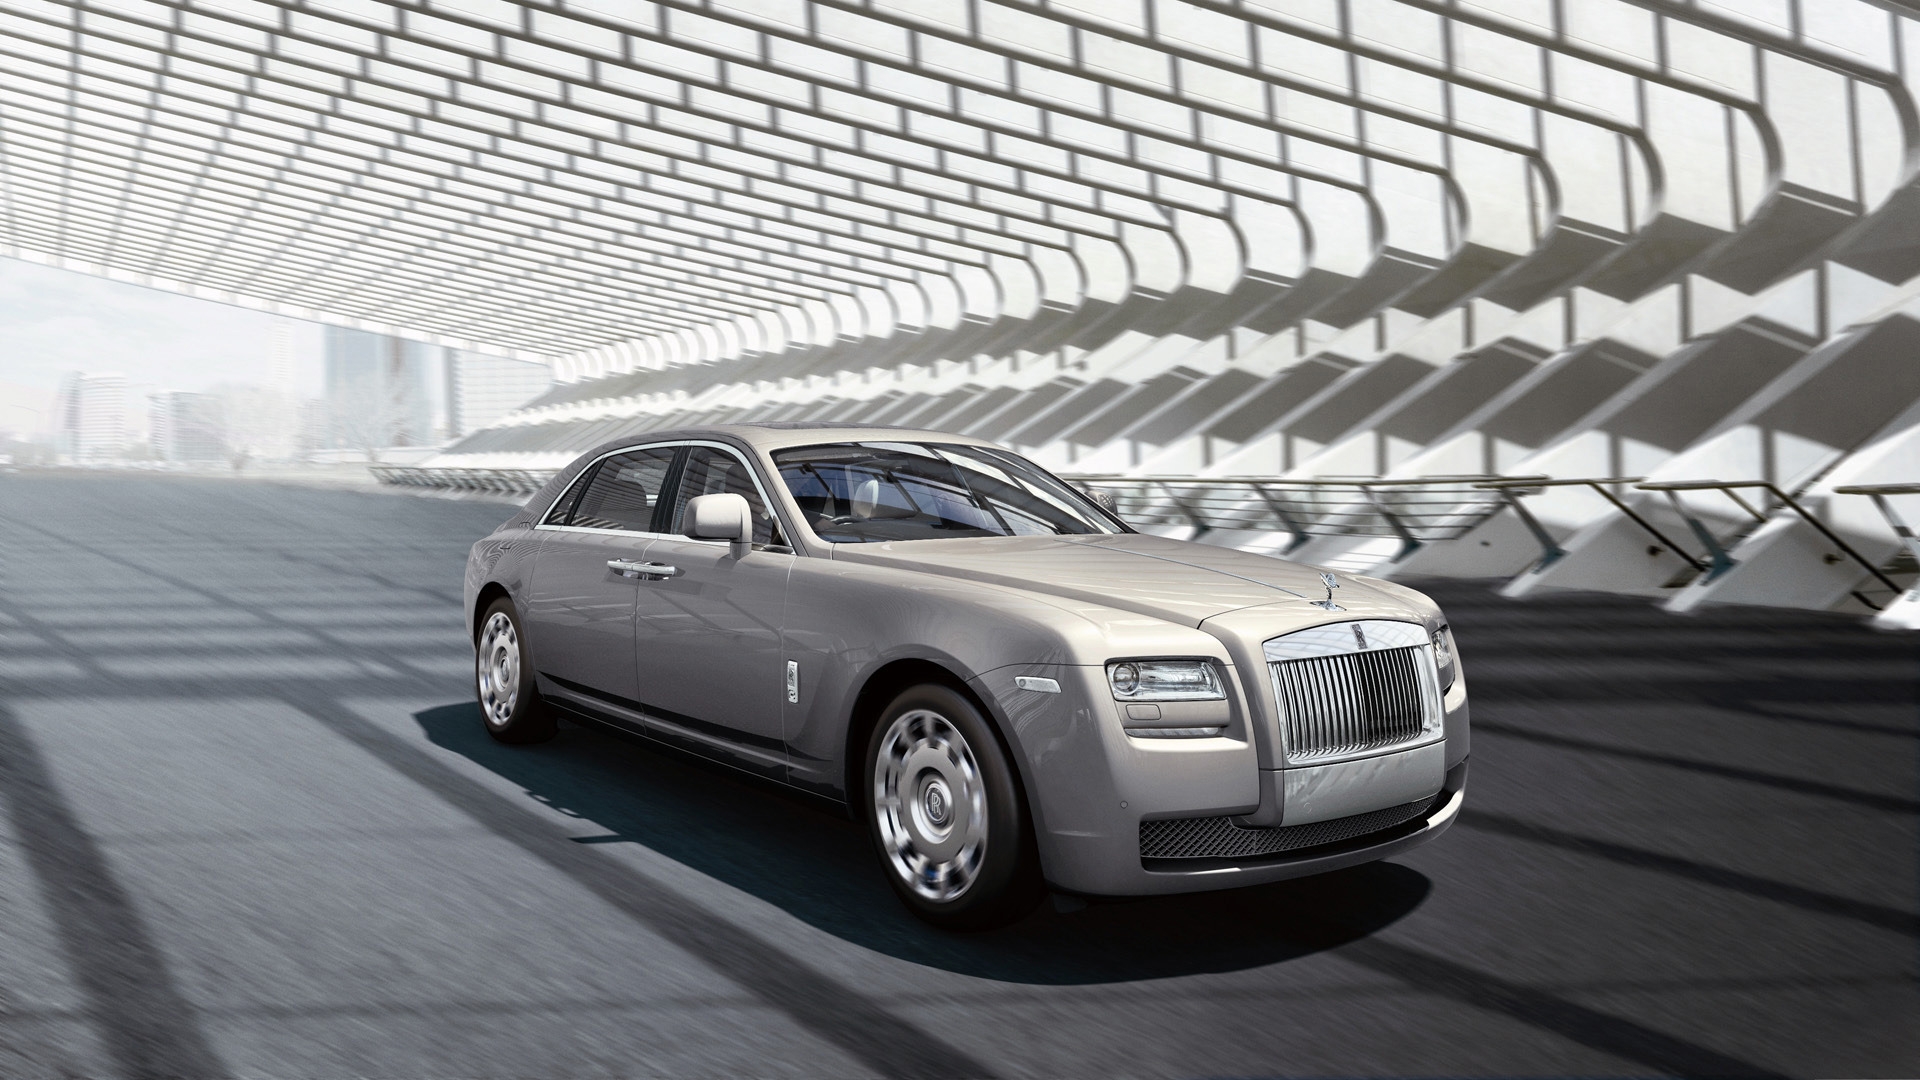 2011 Rolls Royce Ghost for 1920 x 1080 HDTV 1080p resolution